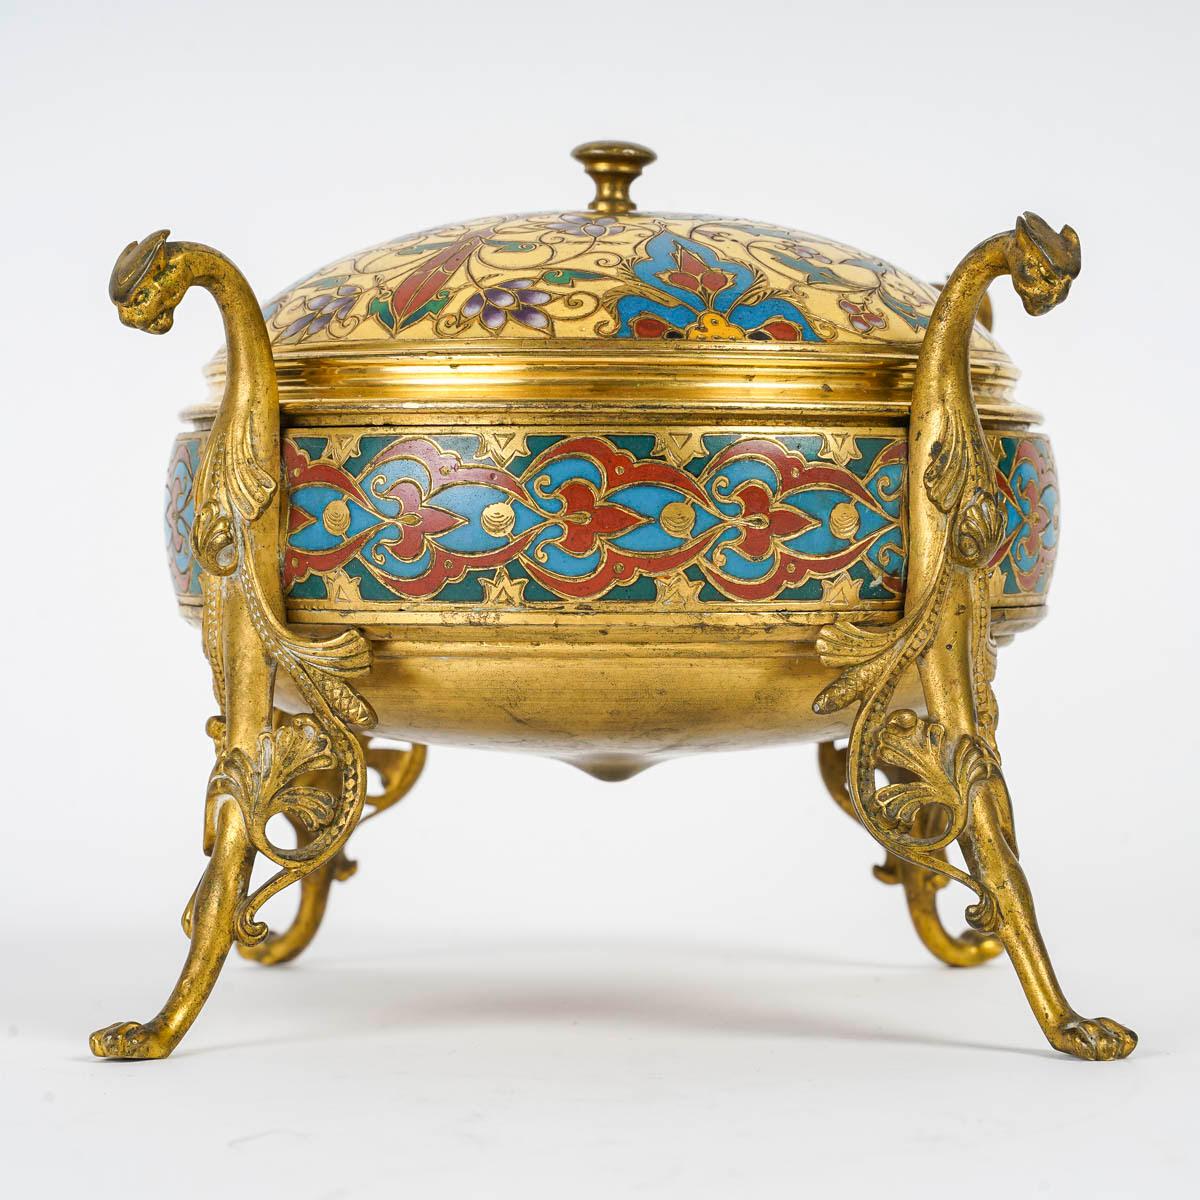 French Enamelled Bronze Box, Signed F. Barbedienne, 19th Century, Napoleon III Period.